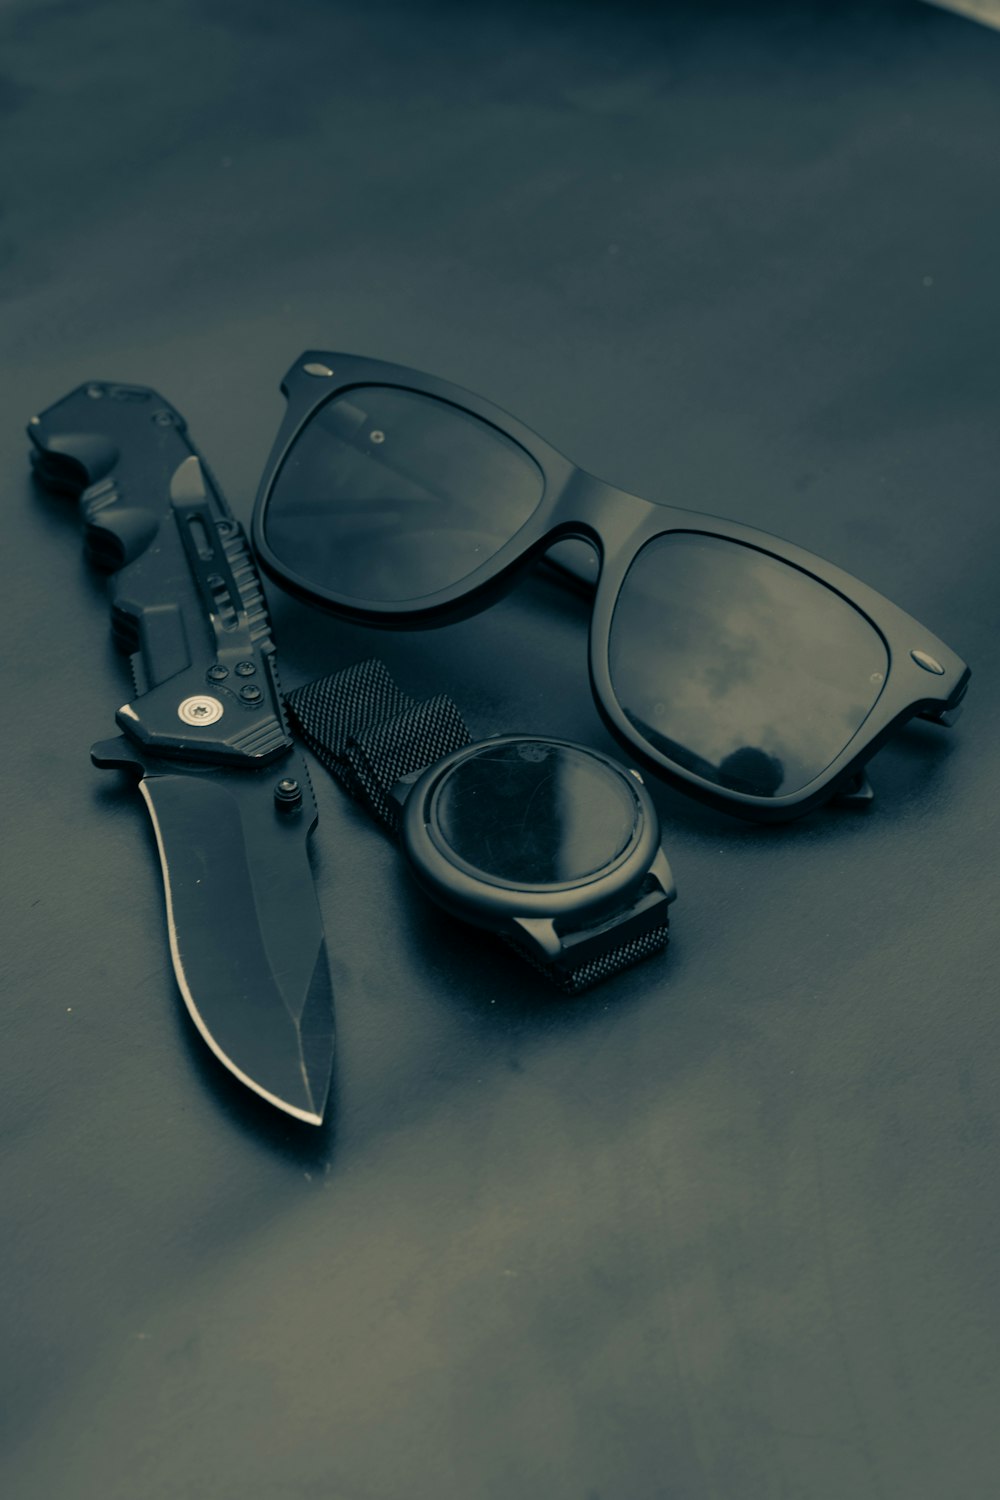 a pair of sunglasses, a comb and a knife on a table